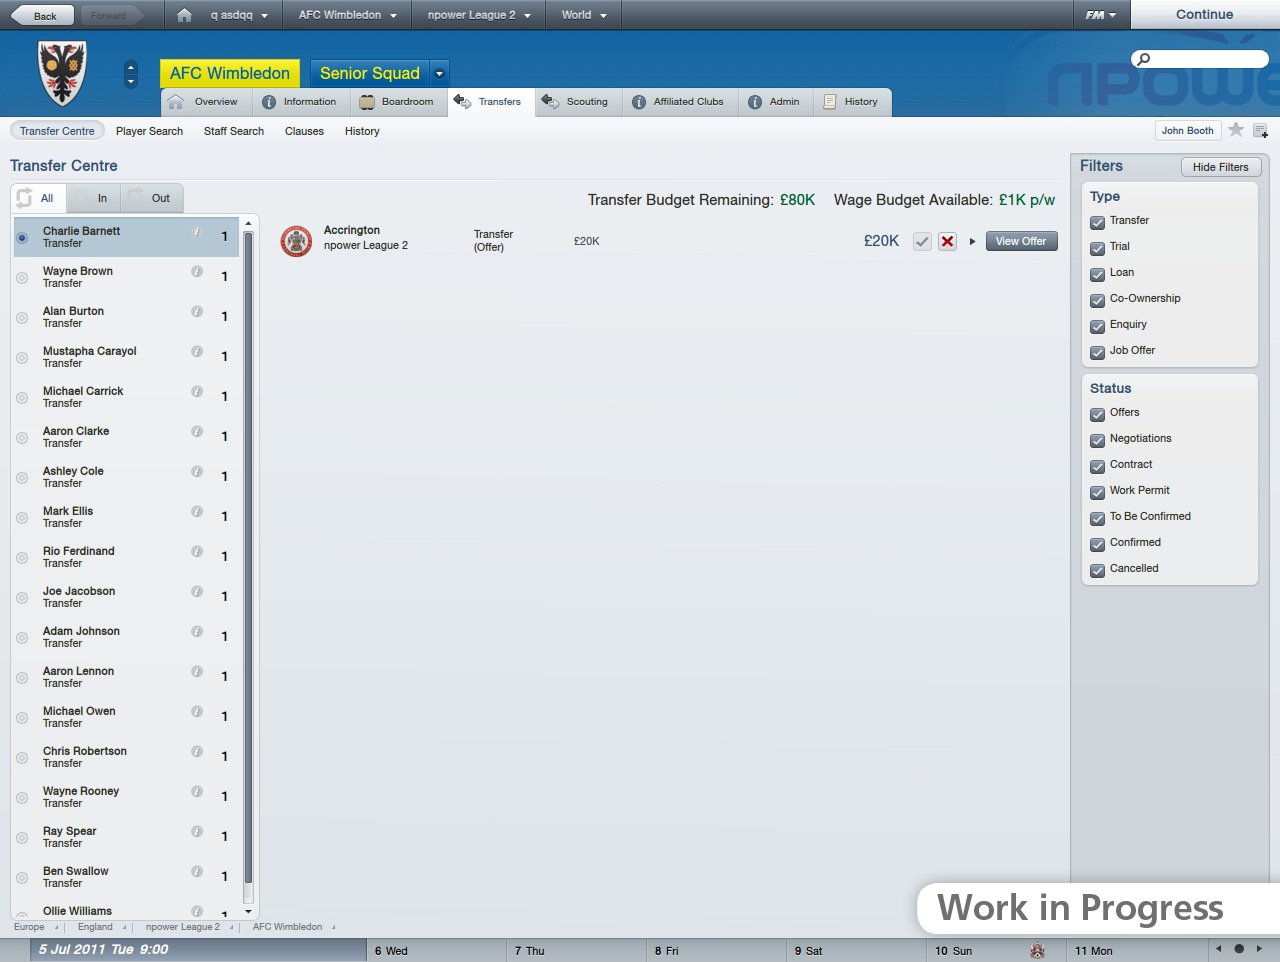 download free football manager 2012 psp